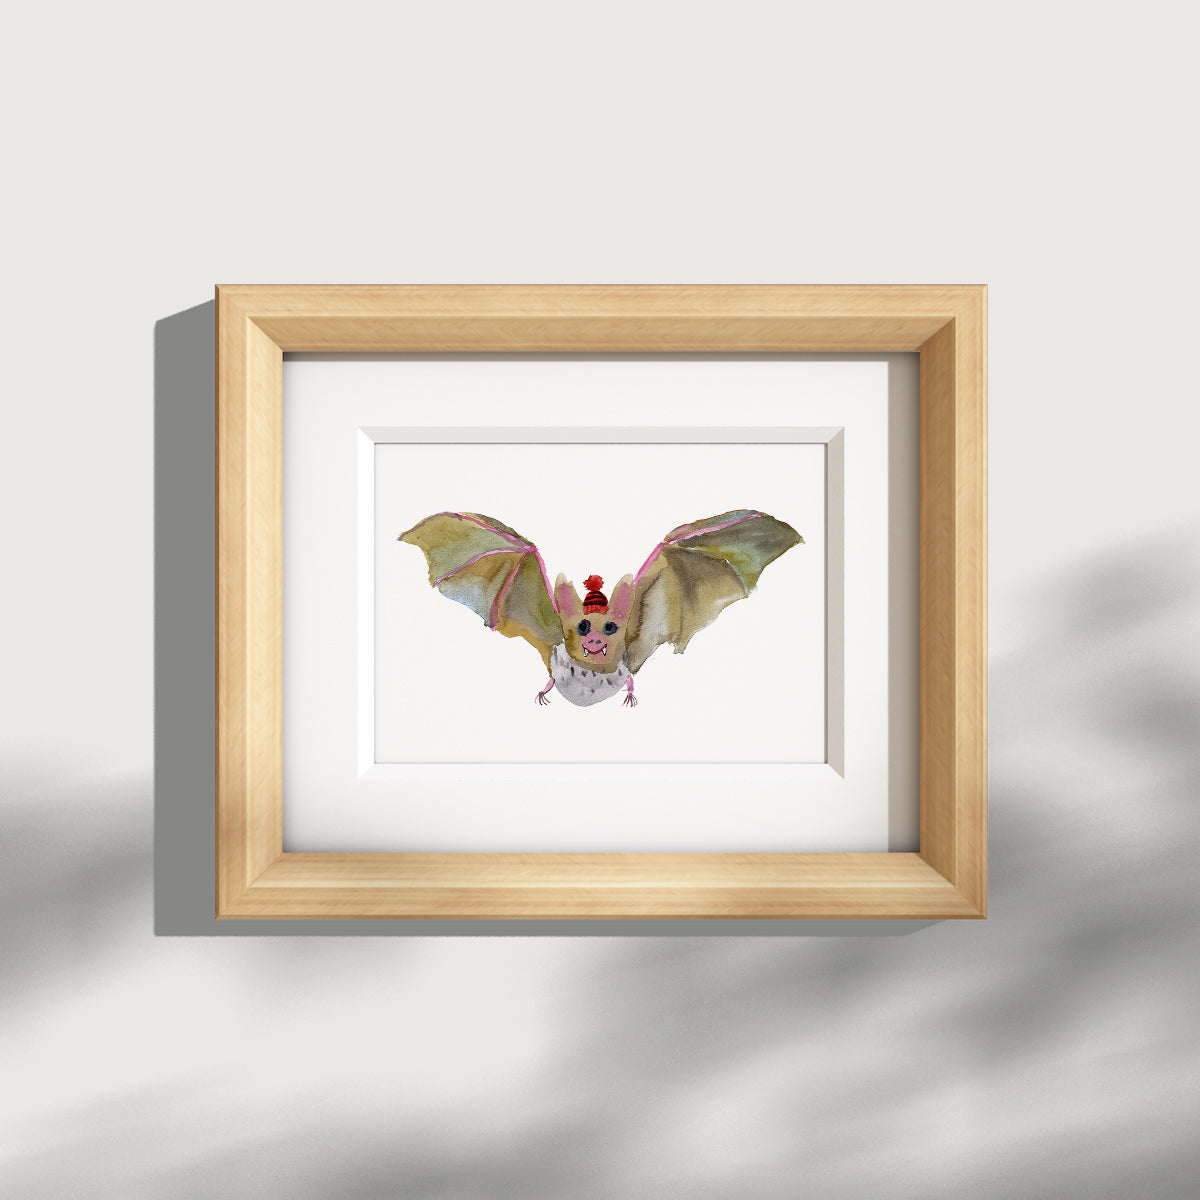 Bristol Based illustrator Rosie Webb, water colour of a bat in a party hat